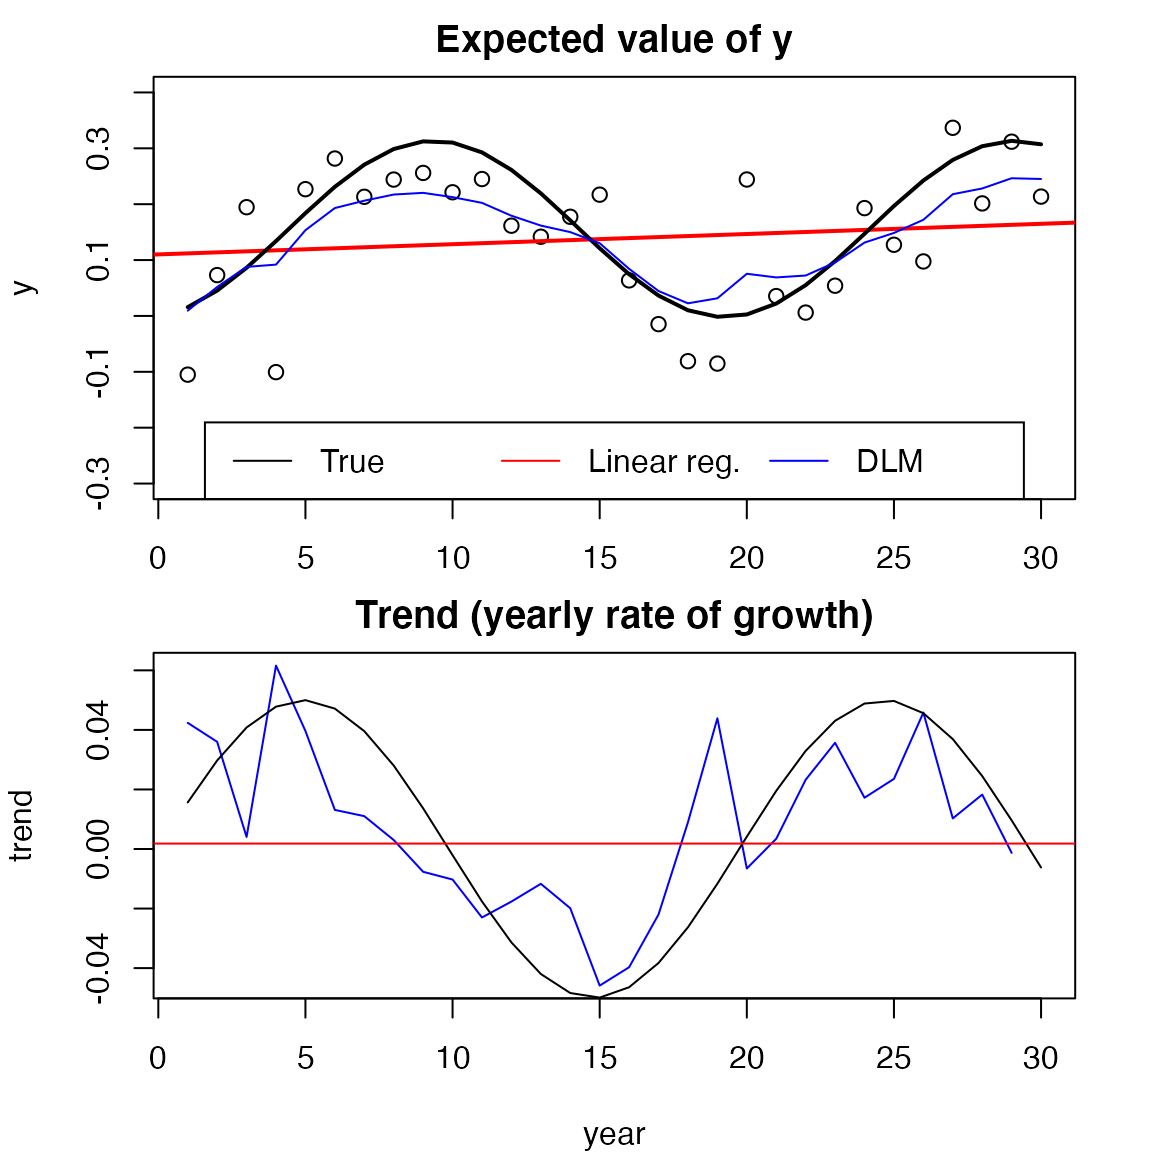 Figure 1. This figure compares a trend analysis using a non-time-varying trend (red) via linear regression versus a trend analysis using a time-varying trend (blue). The black line is the true value and the dots in the top panel are the observations of the black line in the top panel.